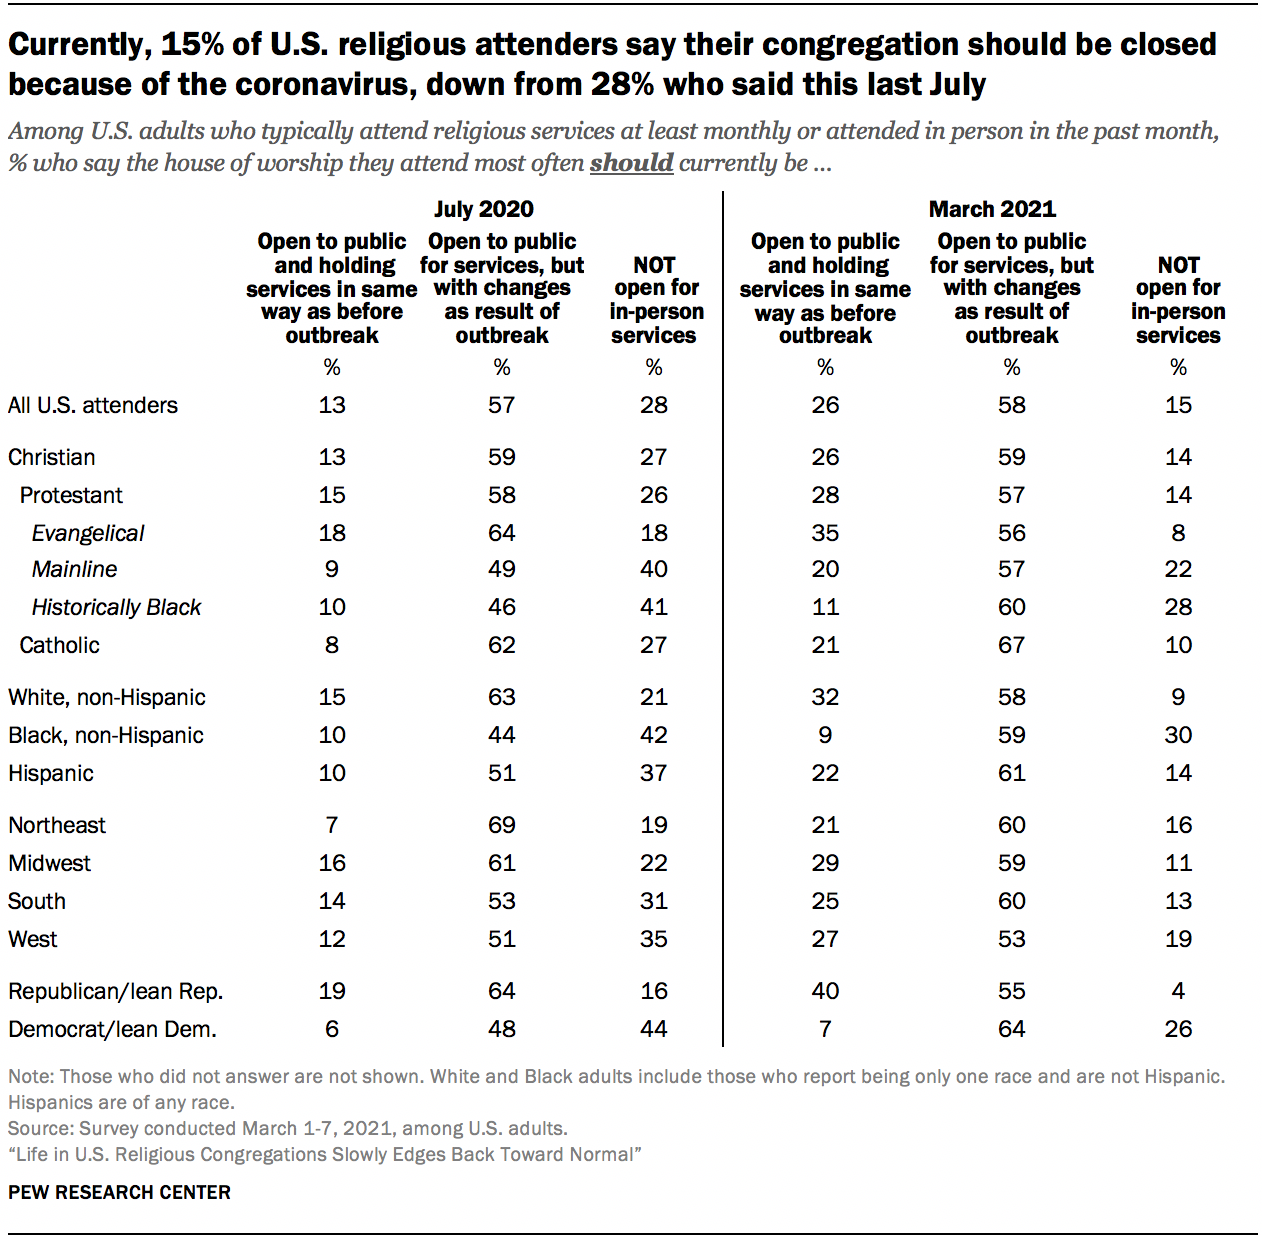 Currently, 15% of U.S. religious attenders say their congregation should be closed because of the coronavirus, down from 28% who said this last July